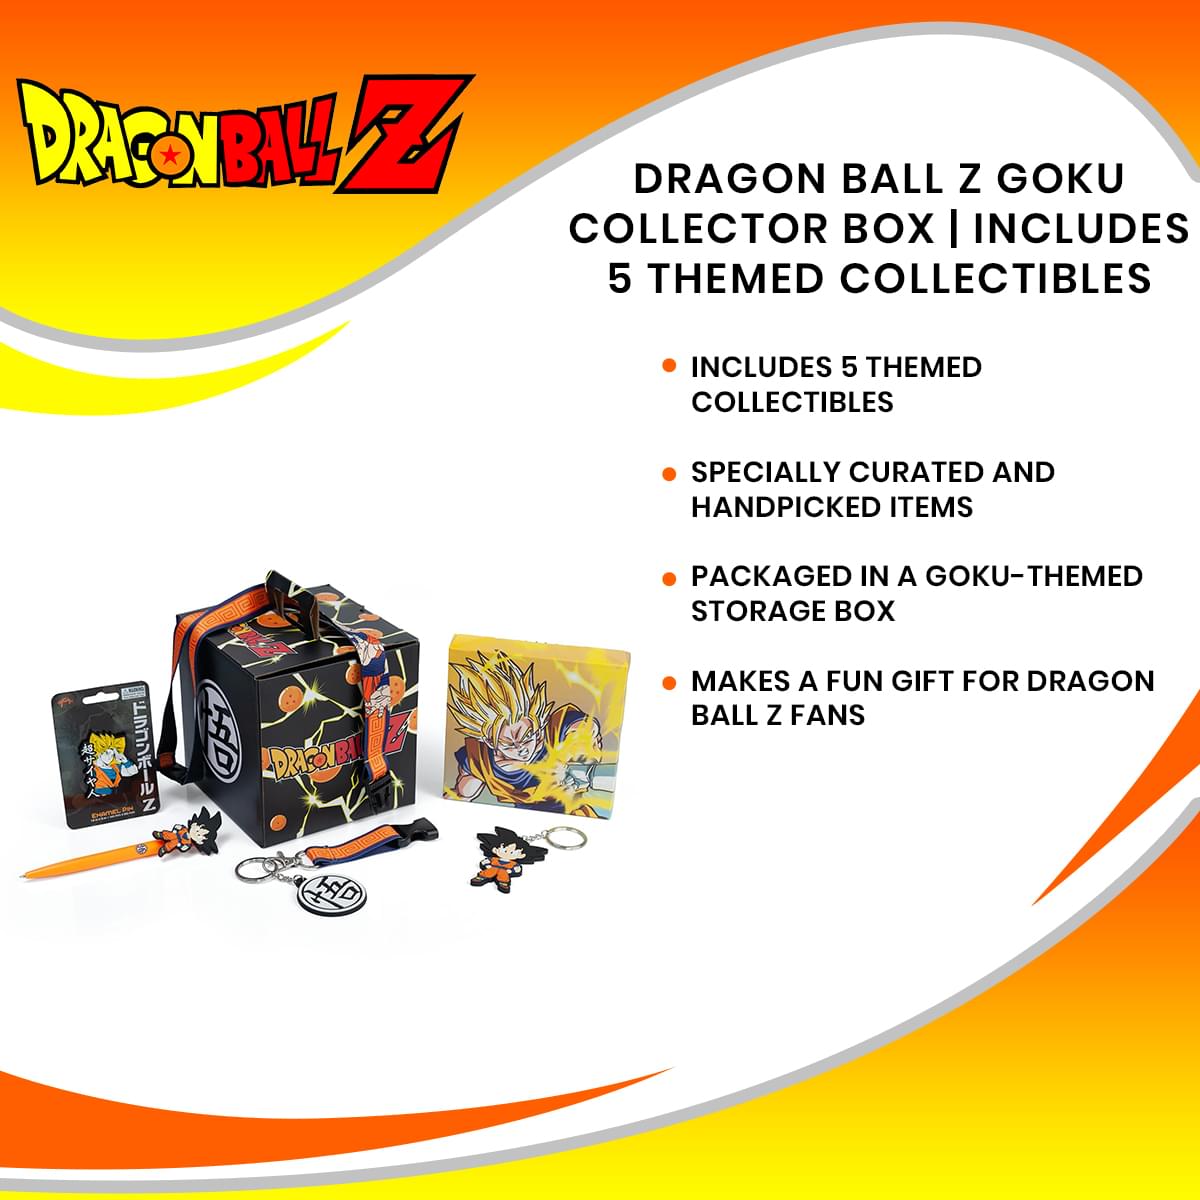 Dragon Ball Z Goku Collector Looksee Box | Includes 5 Themed Collectibles